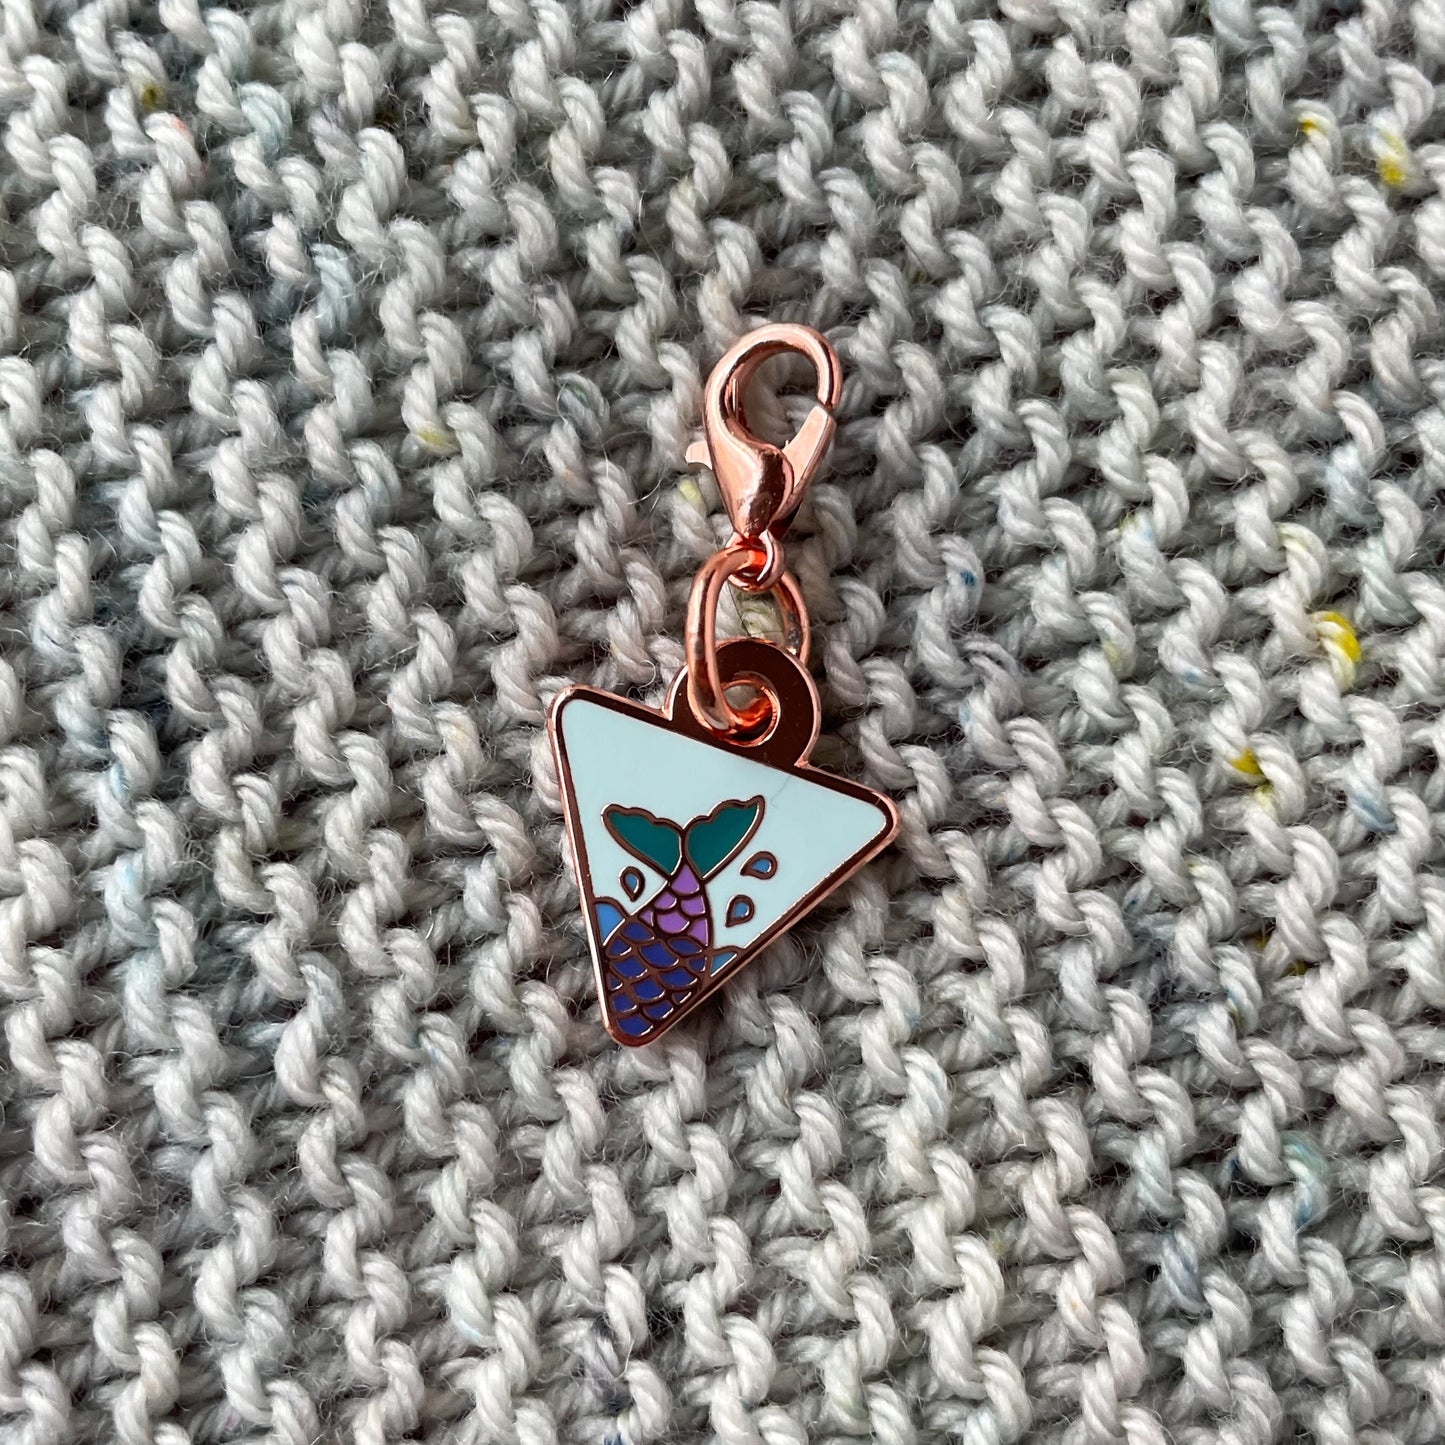 An upside down triangle charm with a mermaid tail in it on top of hand knit garter stitch fabric 